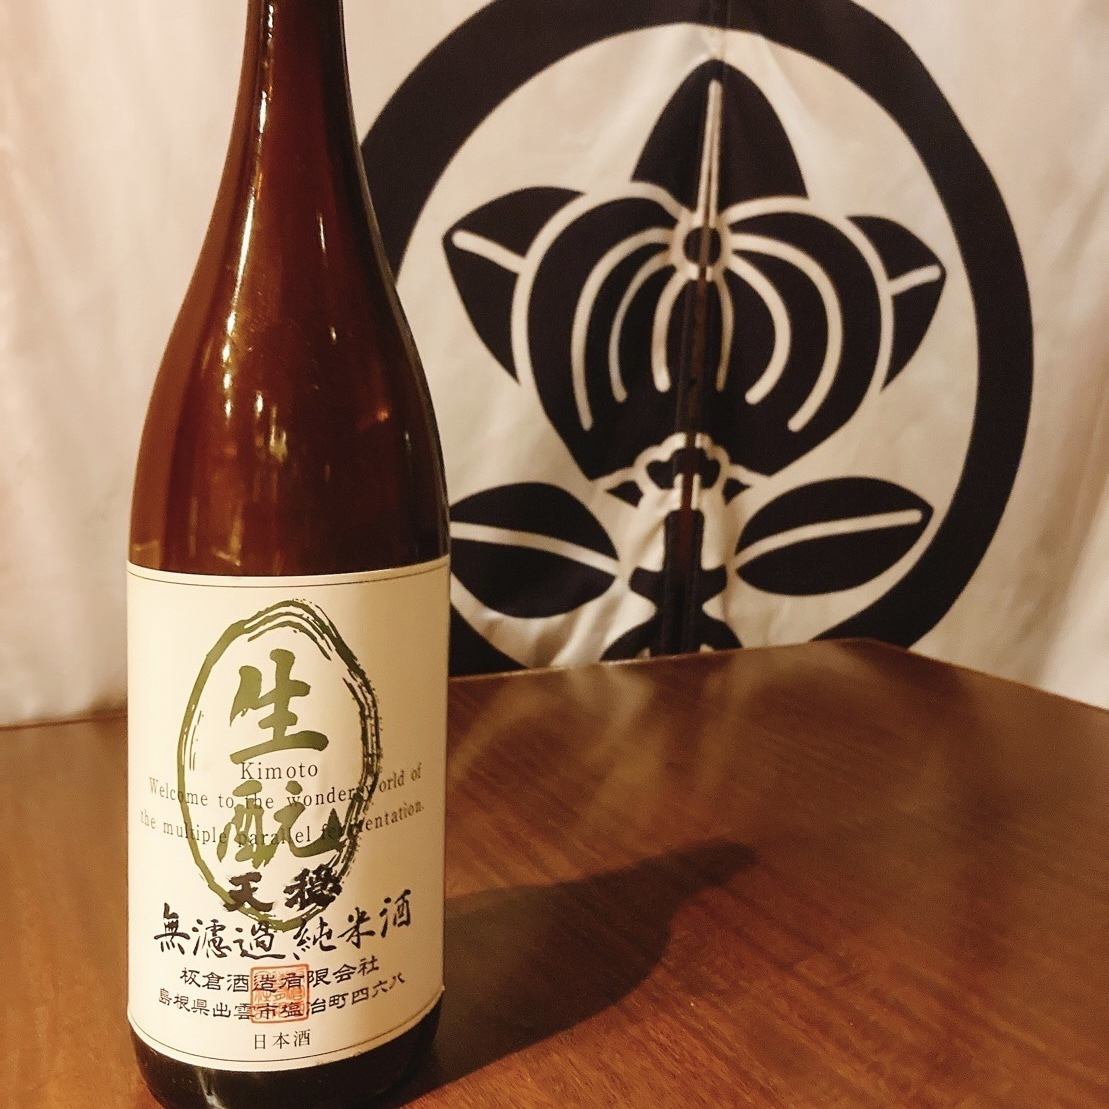 We offer local Hiroshima sake as well as brands from all over the country.